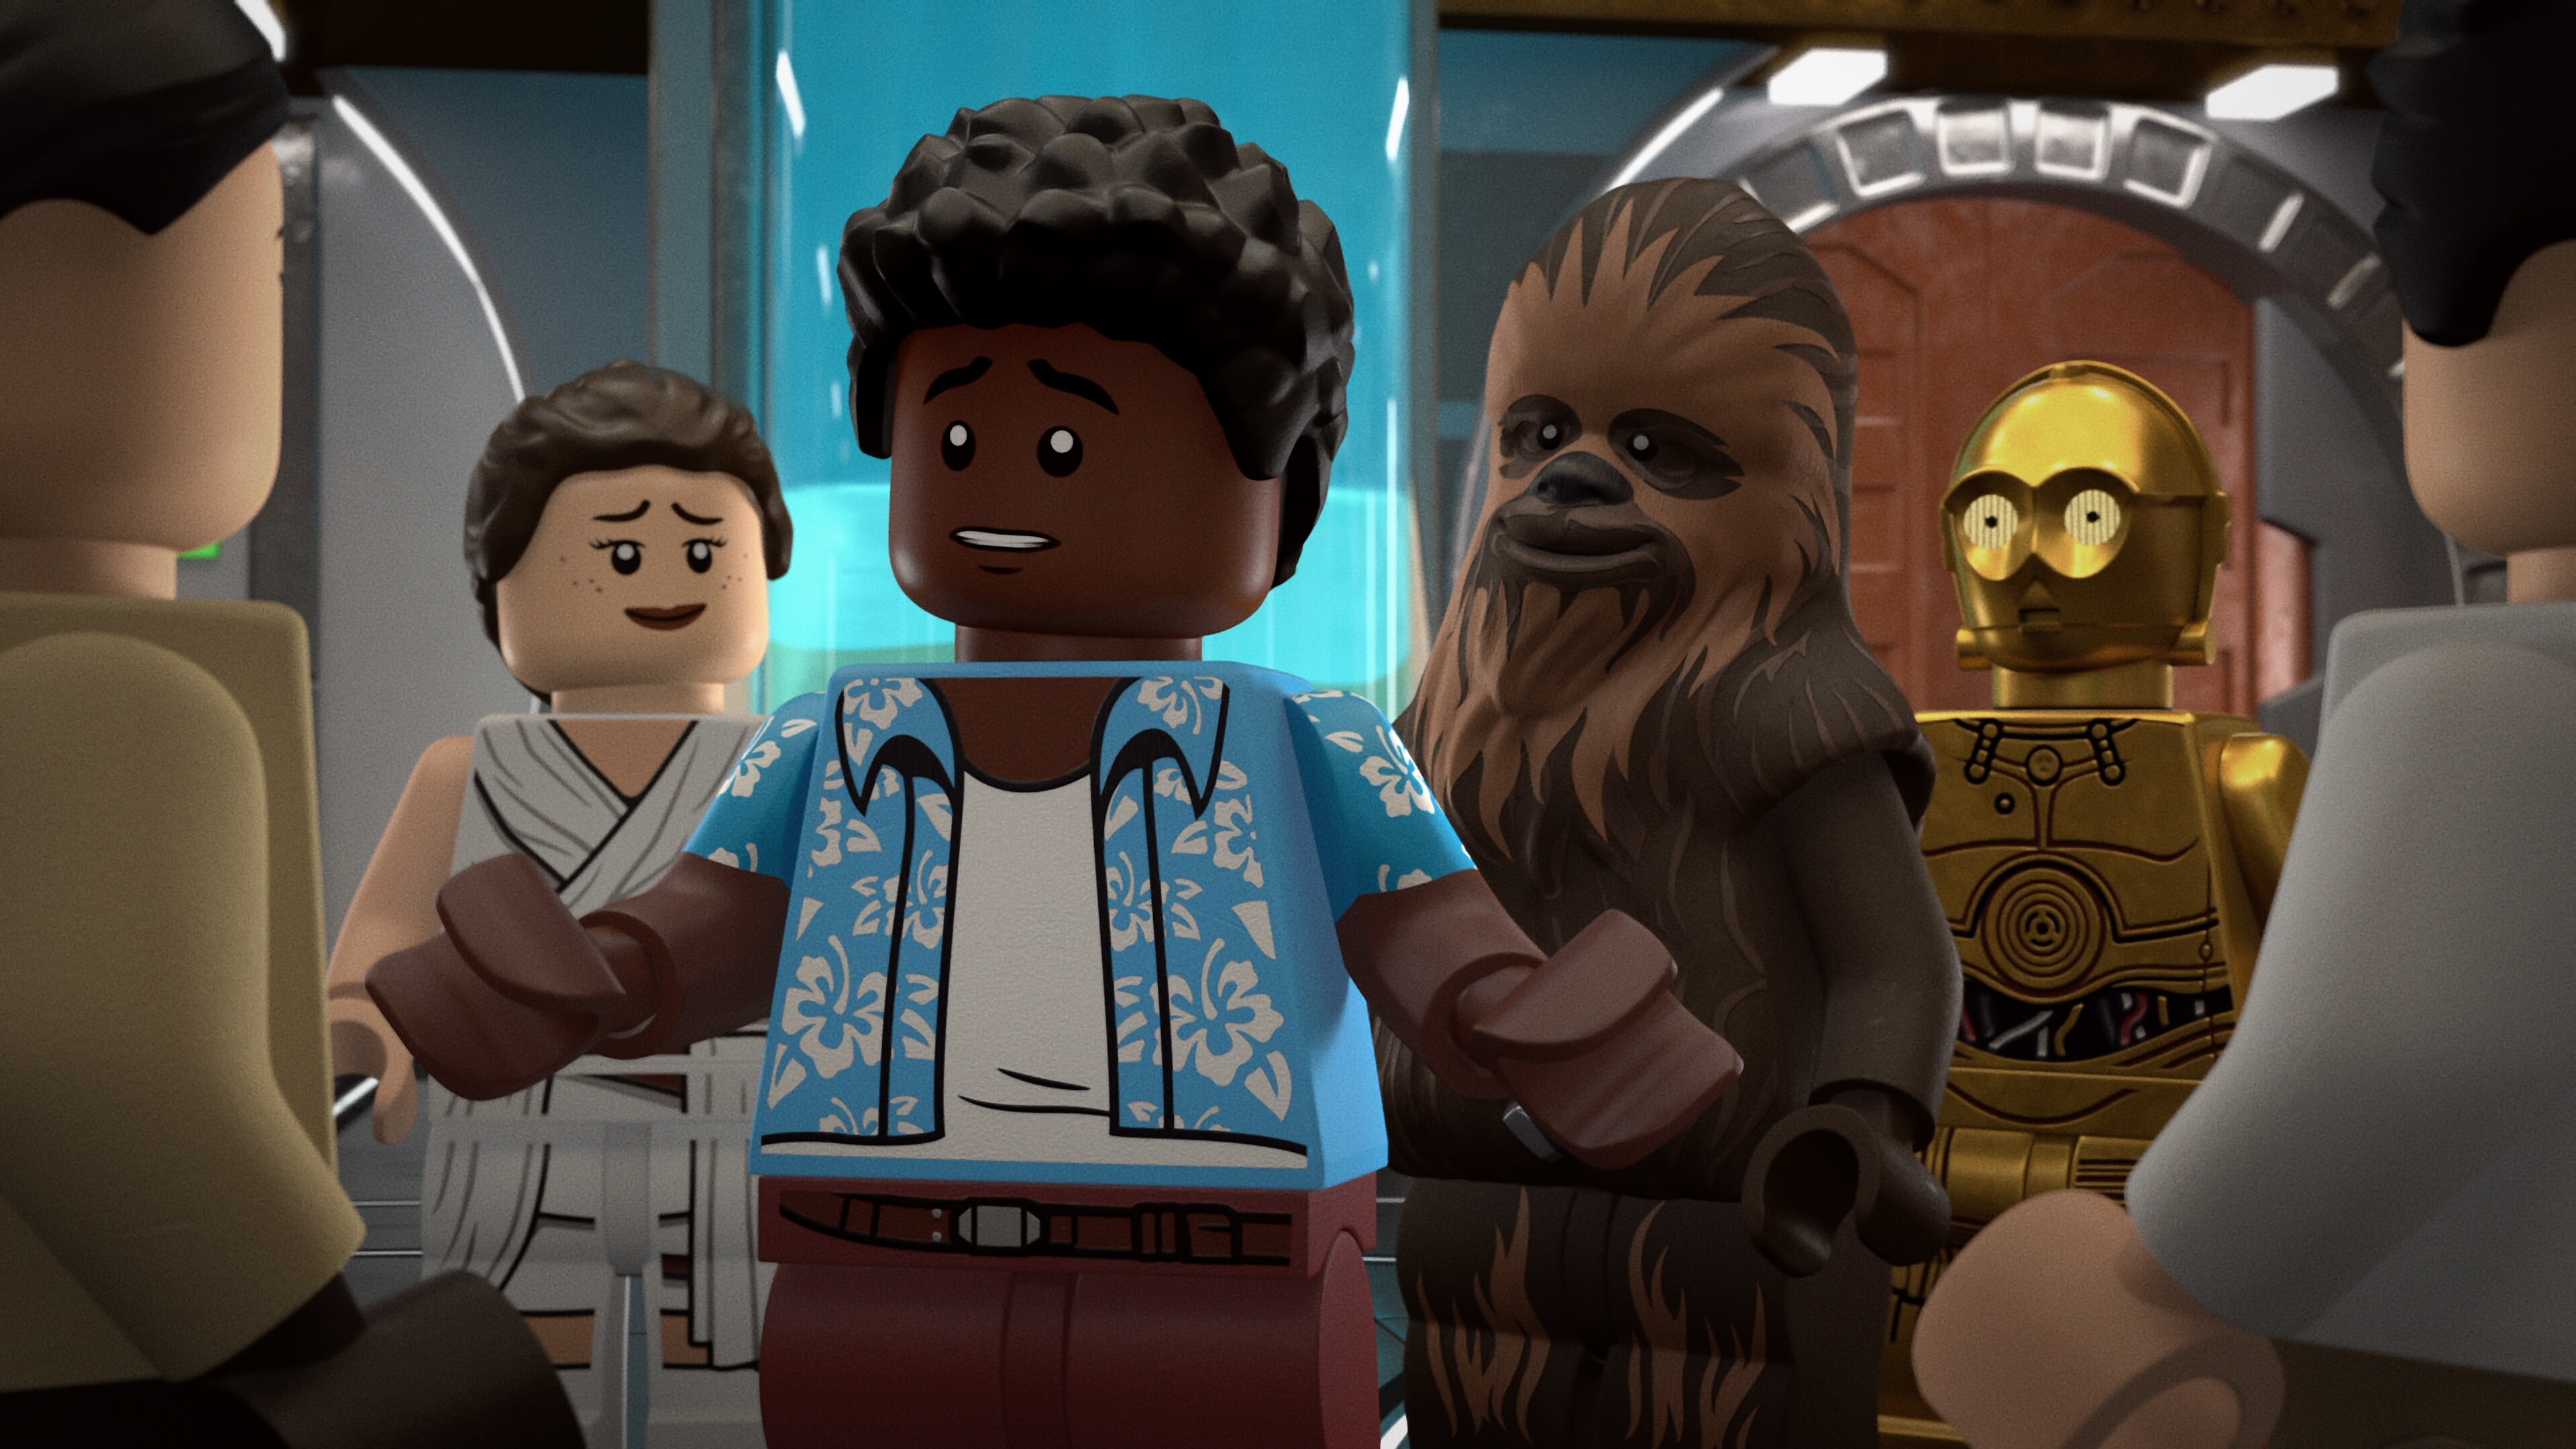  SUMMER HEATS UP WITH THE ARRIVAL OF THE HOT TRAILER FOR “LEGO® STAR WARS SUMMER VACATION,” PREMIERING AUGUST 5 ON DISNEY+